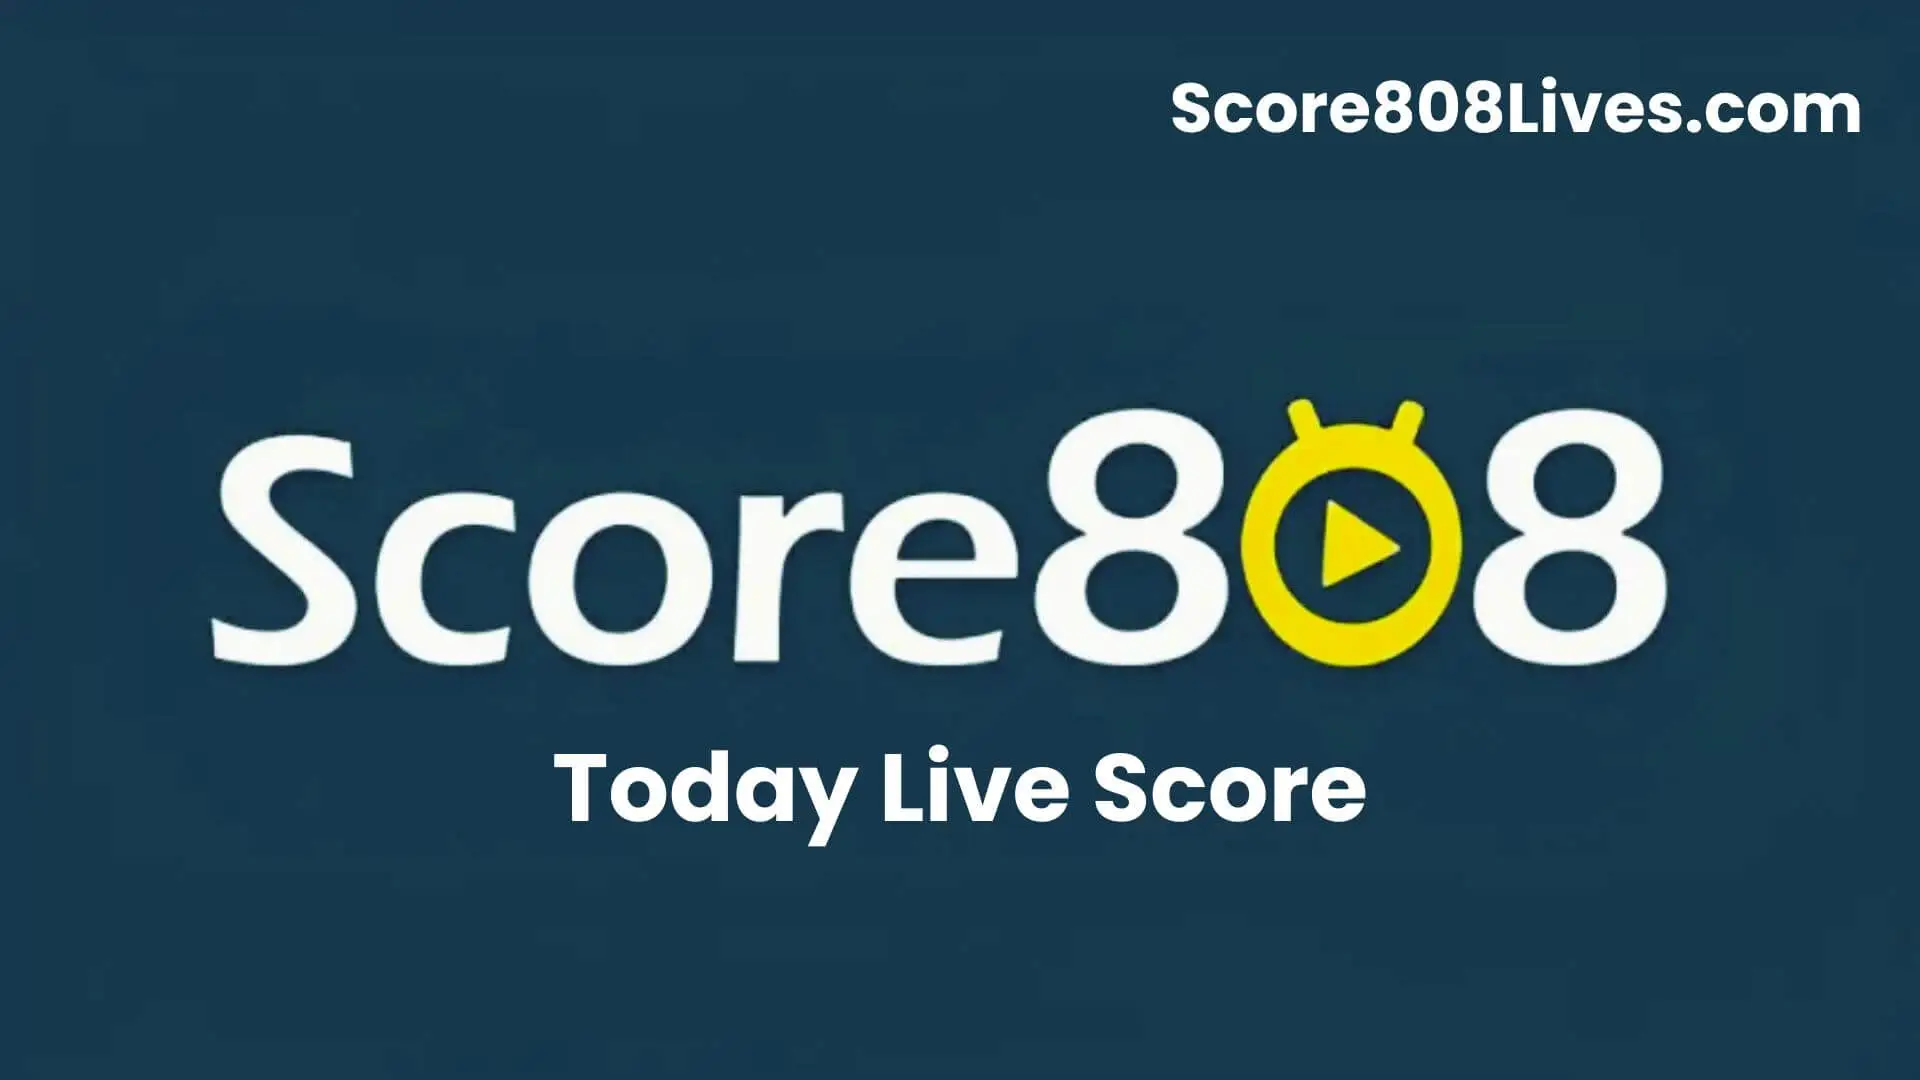 Score808Lives Live Football Score, Fixtures and Results